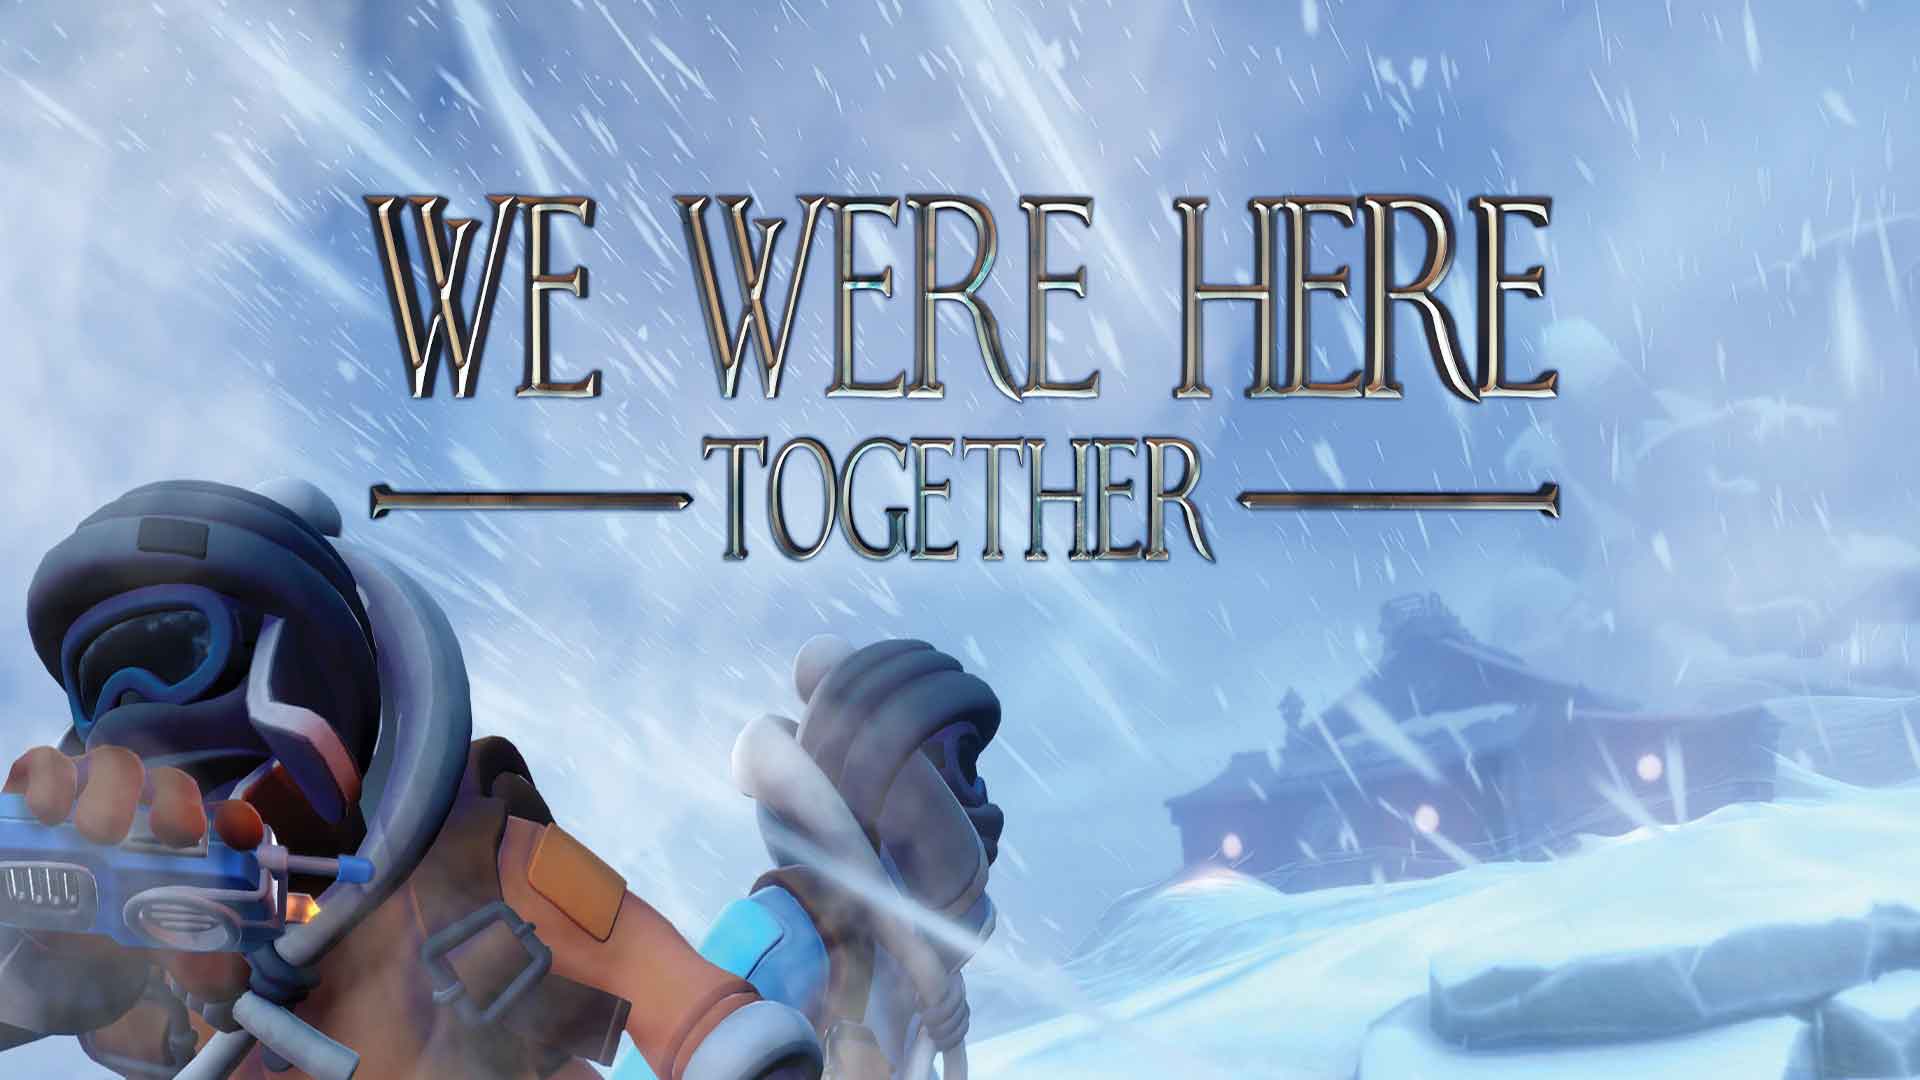 download free we were here together too